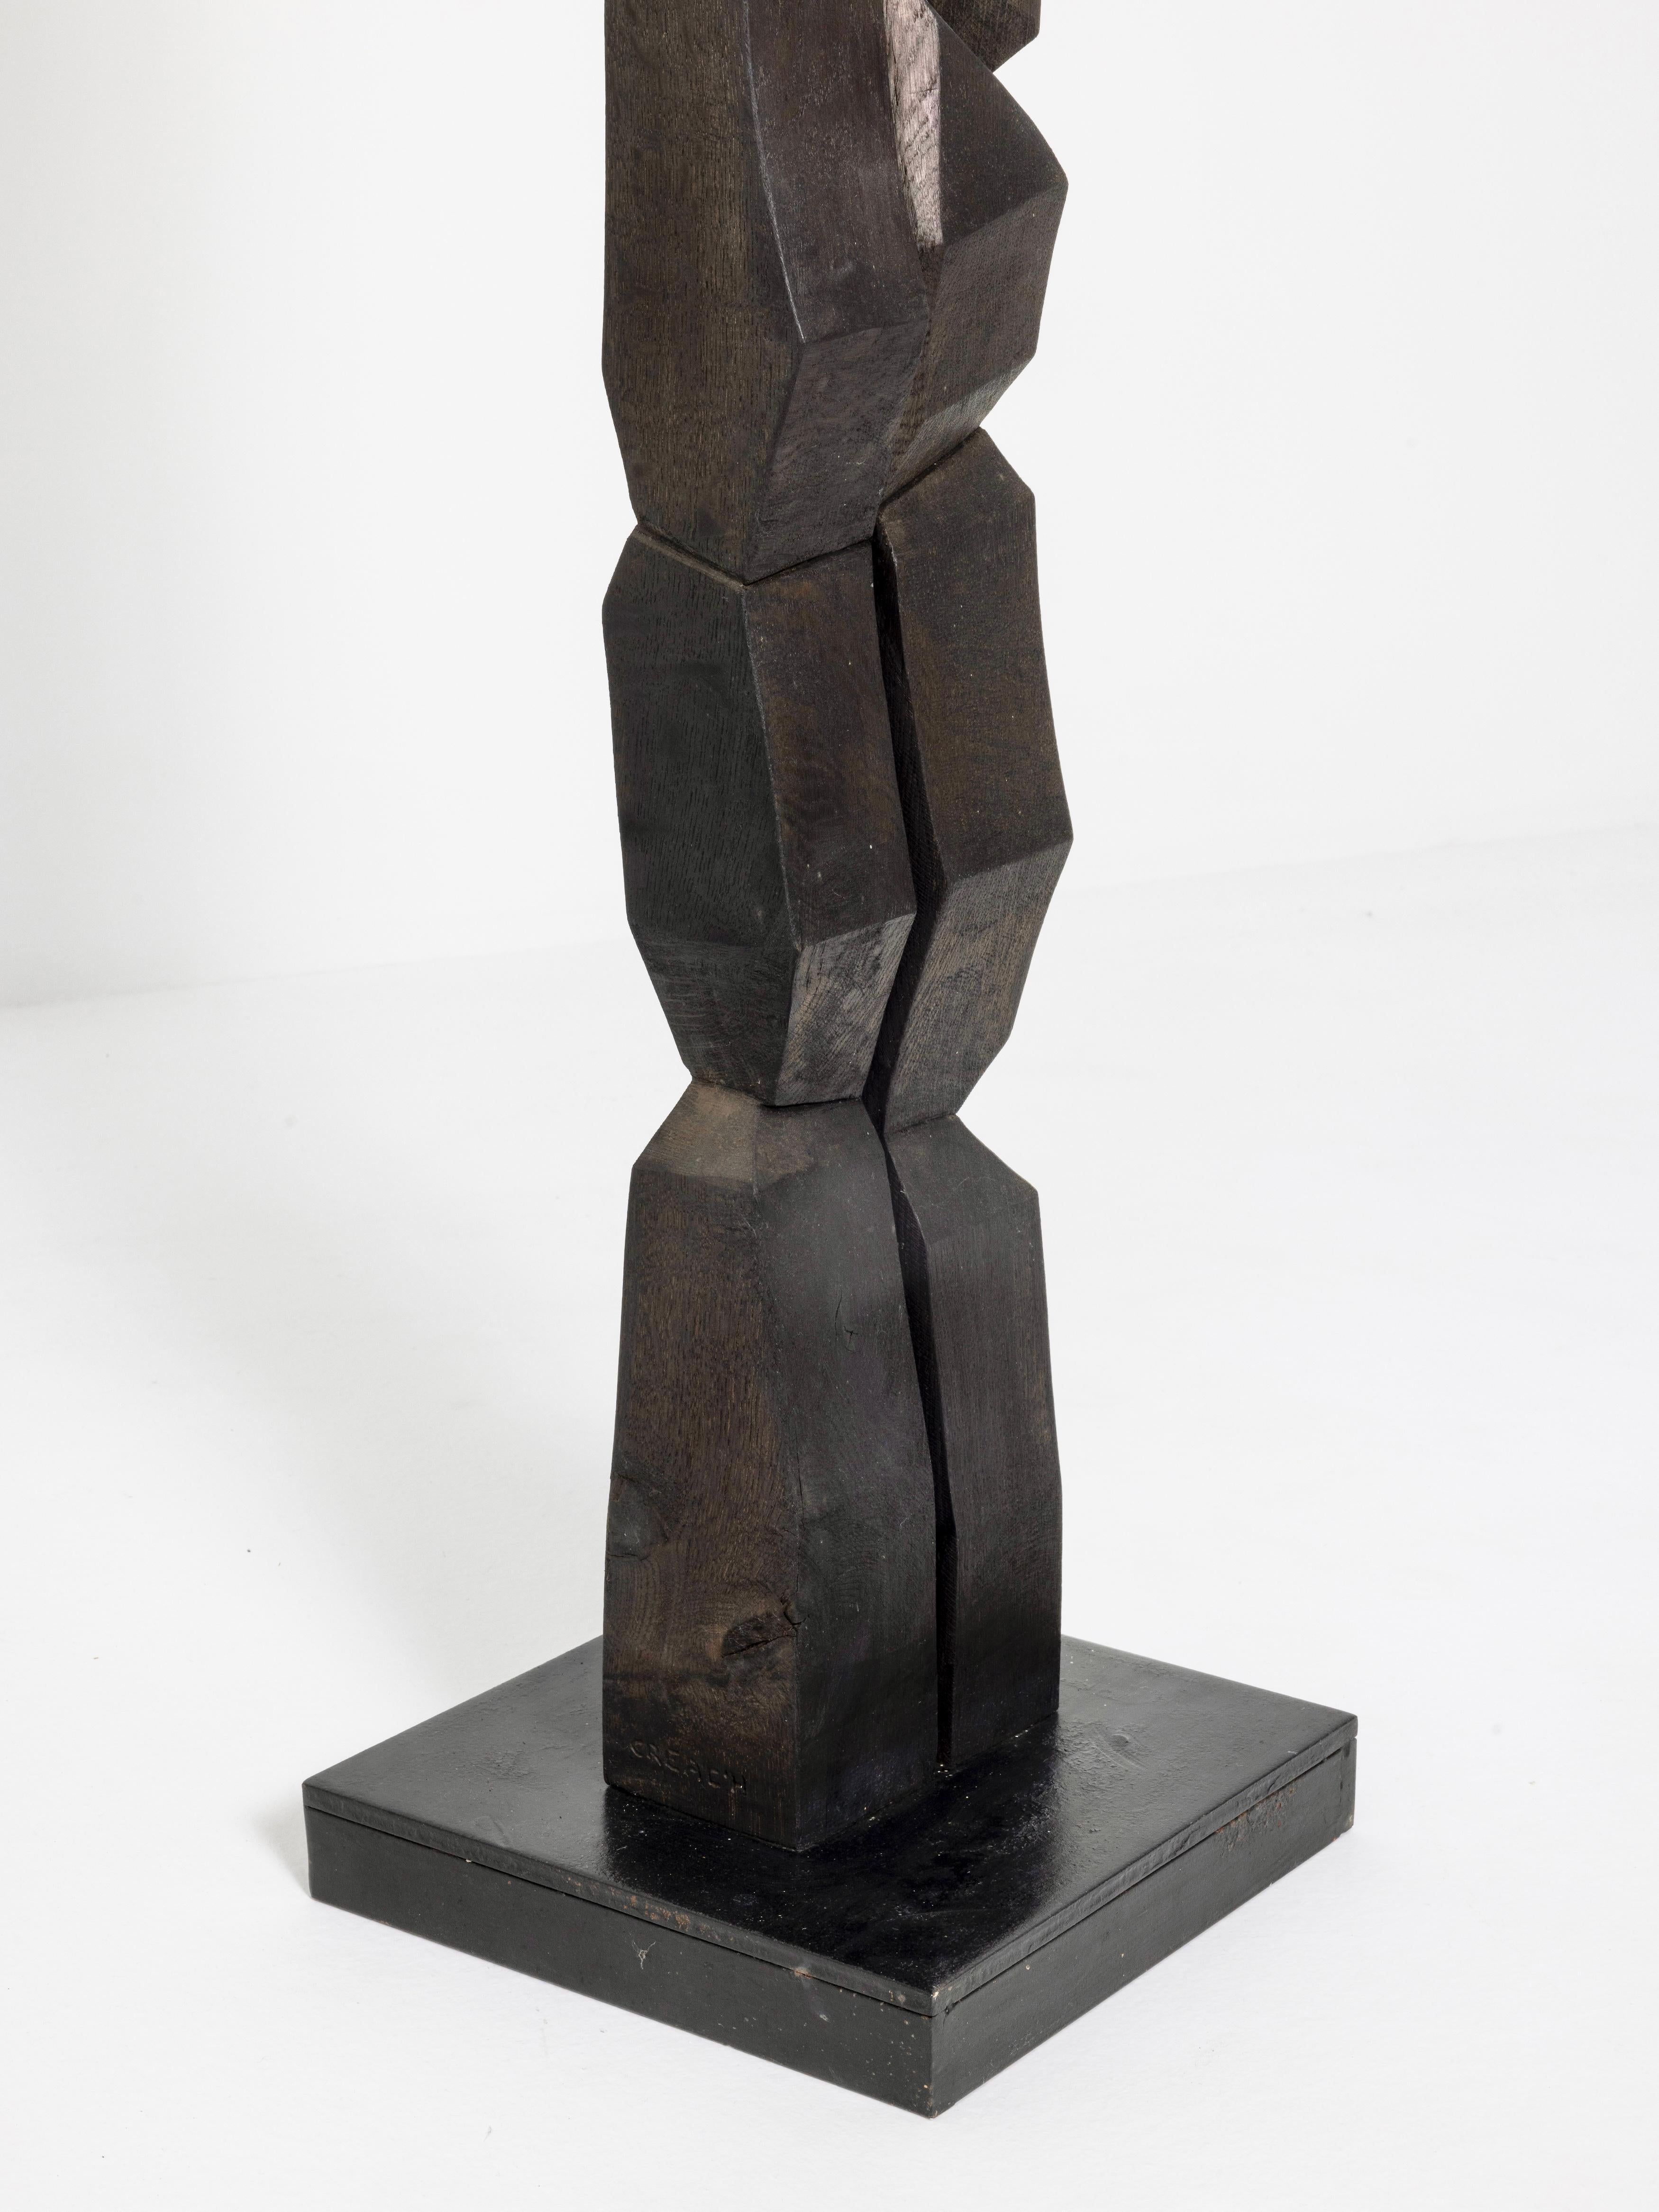 Hand-Carved Contemporary Wooden Totem Sculpture by Bertrand Créac'h, France For Sale